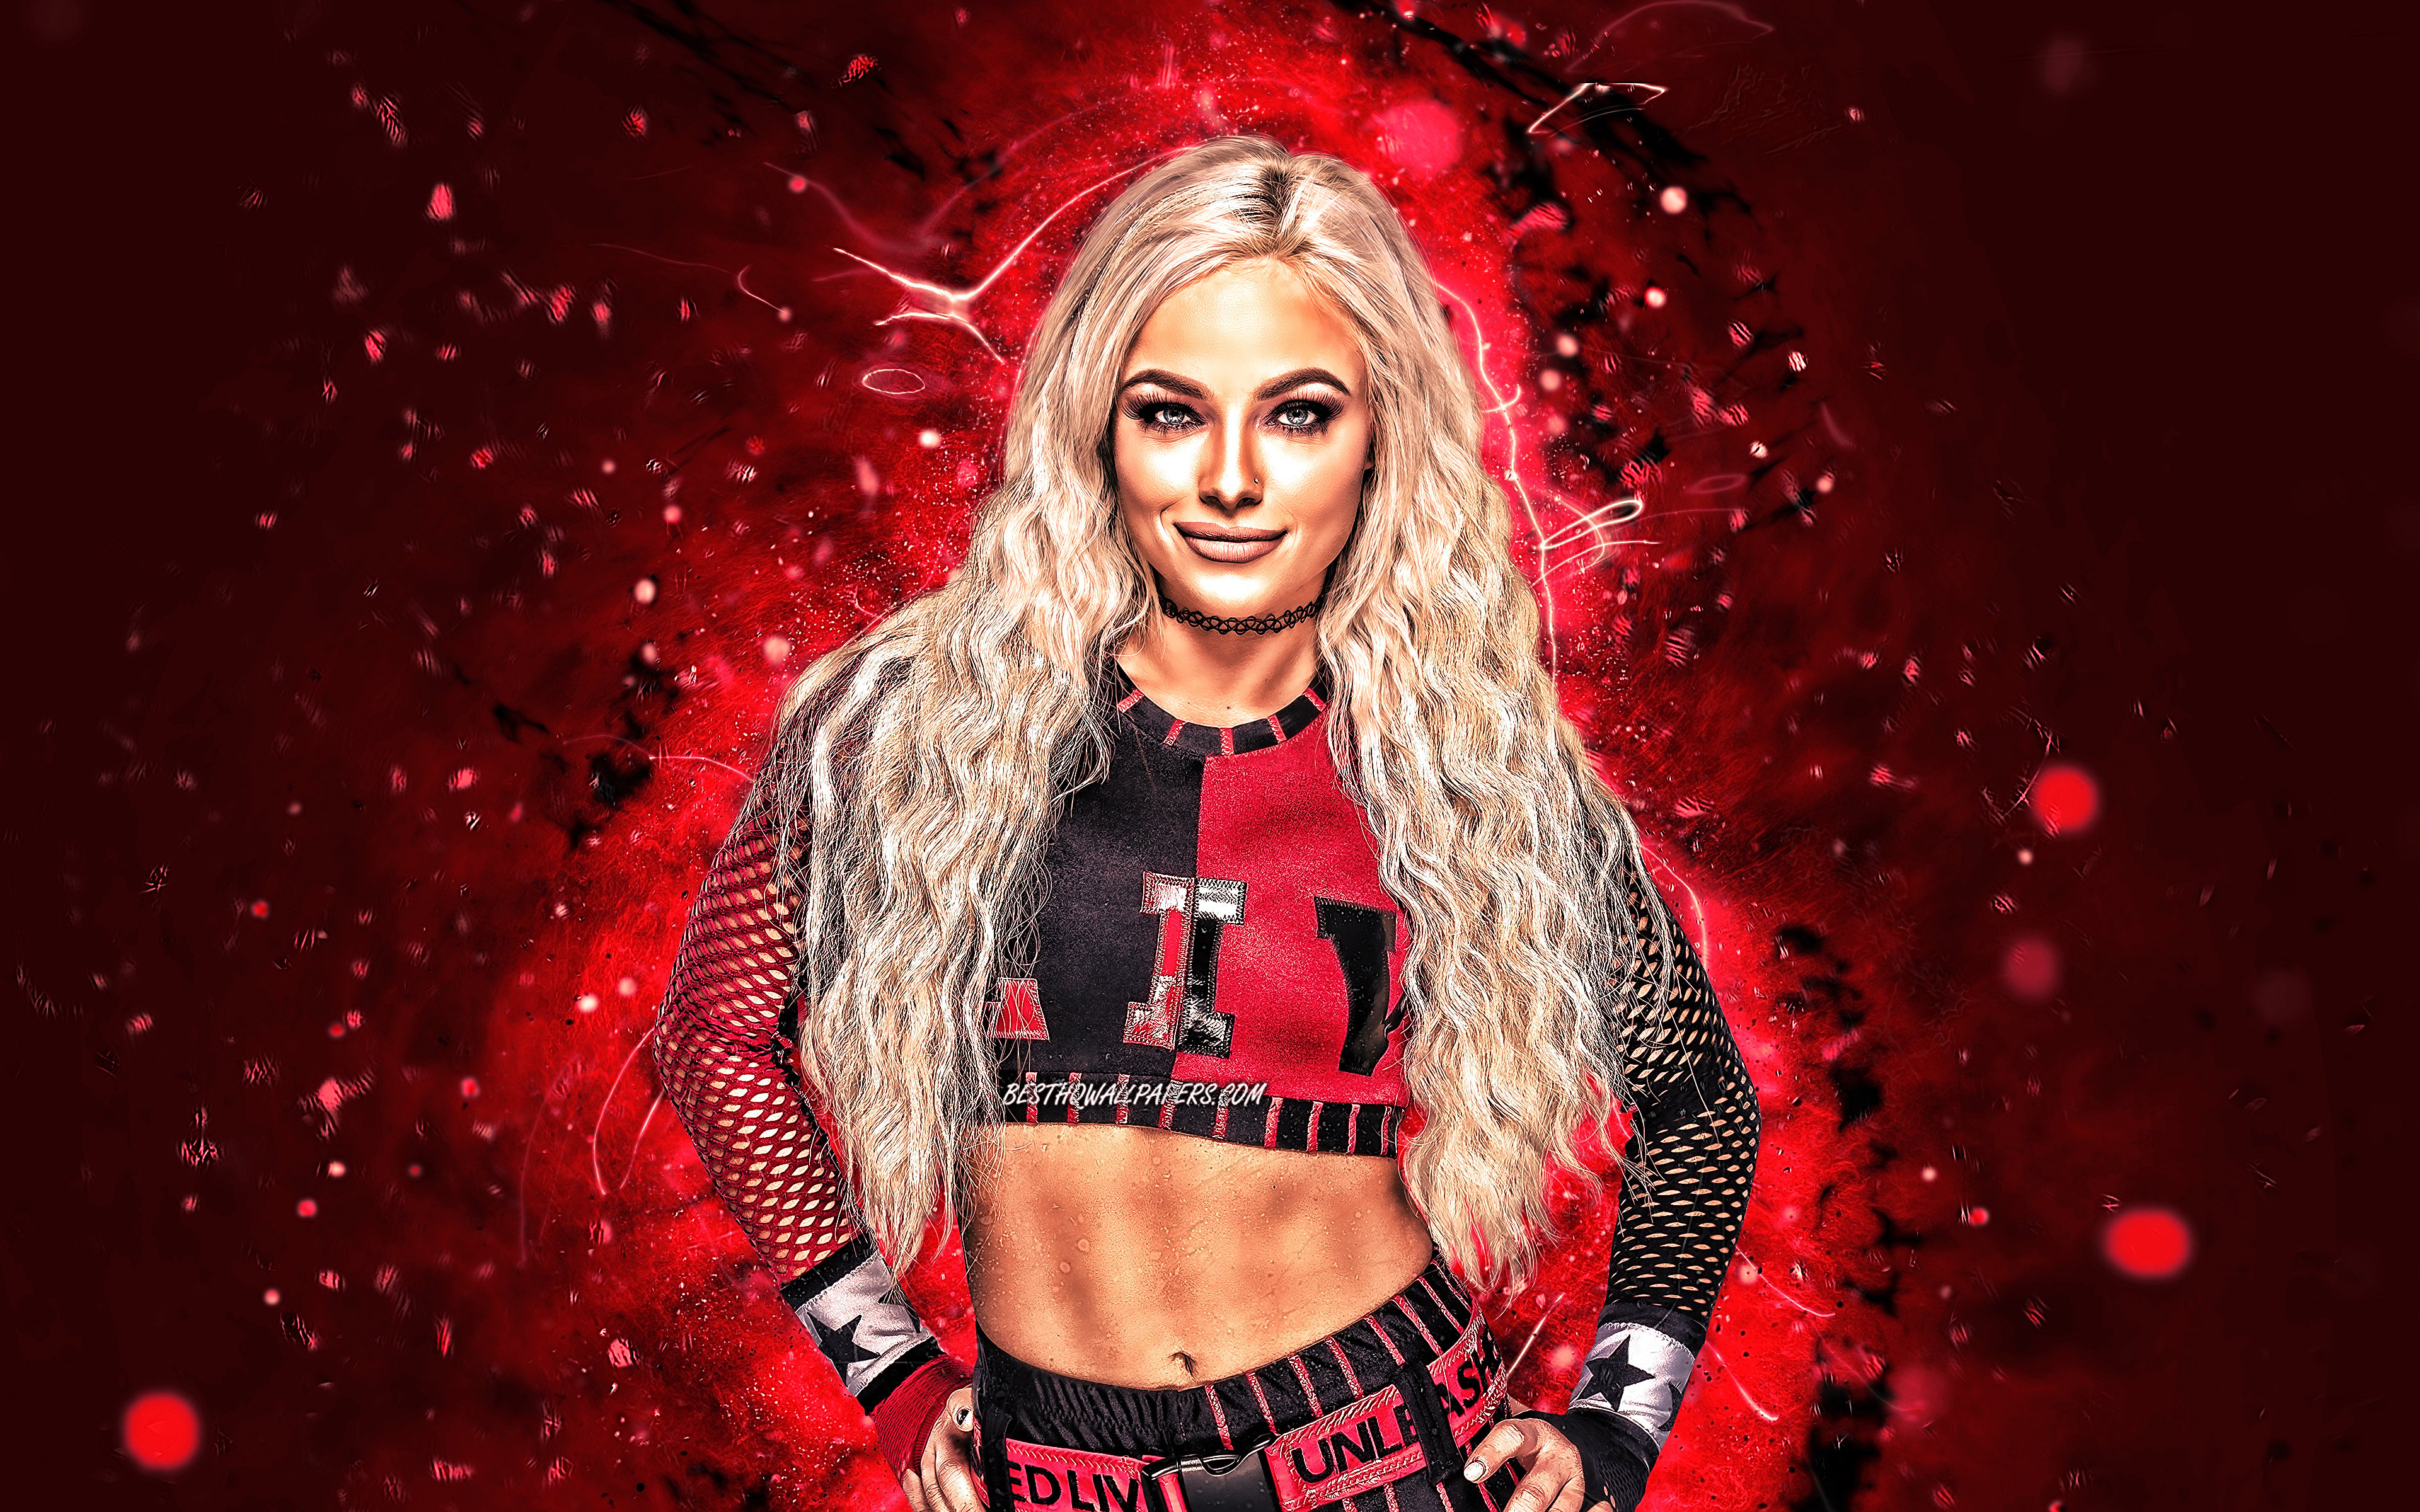 Download wallpaper 4k, Liv Morgan, WWE, american wrestlers, wrestling, Victoria Crawford, red neon lights, Gionna Jene Daddio, female wrestlers, wrestlers, Liv Morgan 4K for desktop with resolution 3840x2400. High Quality HD picture